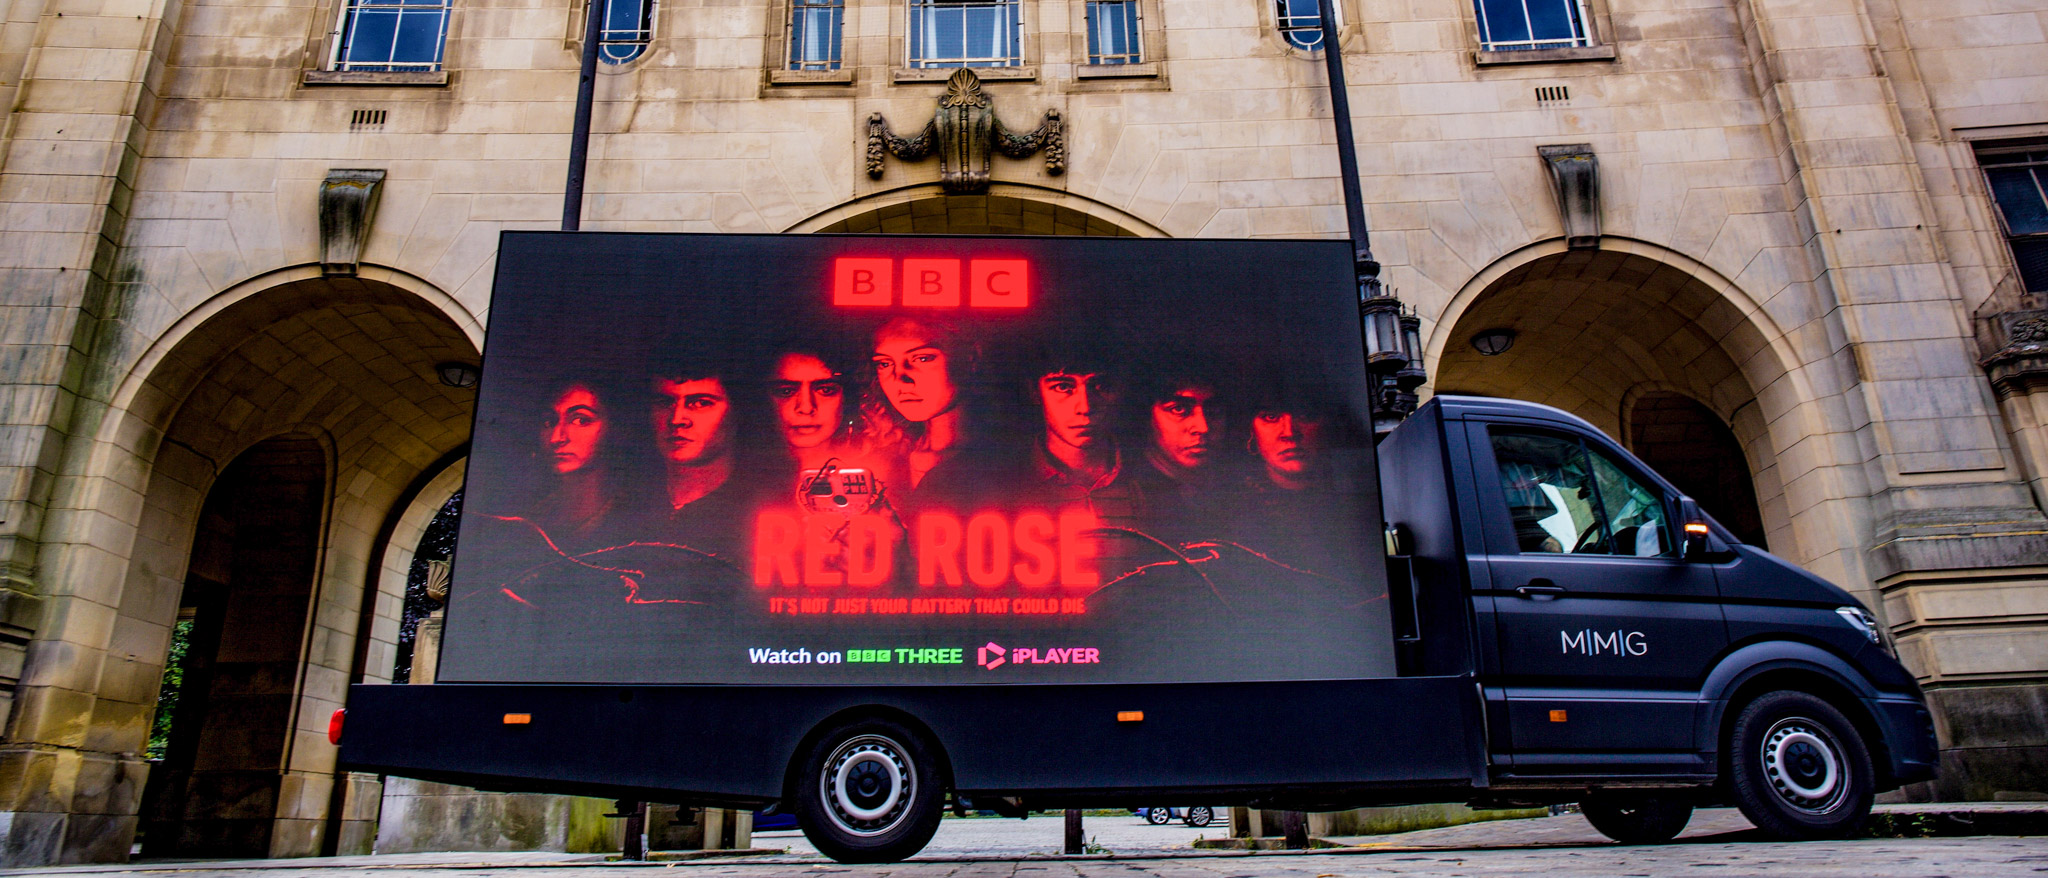 Red Rose TV show on a digital screen